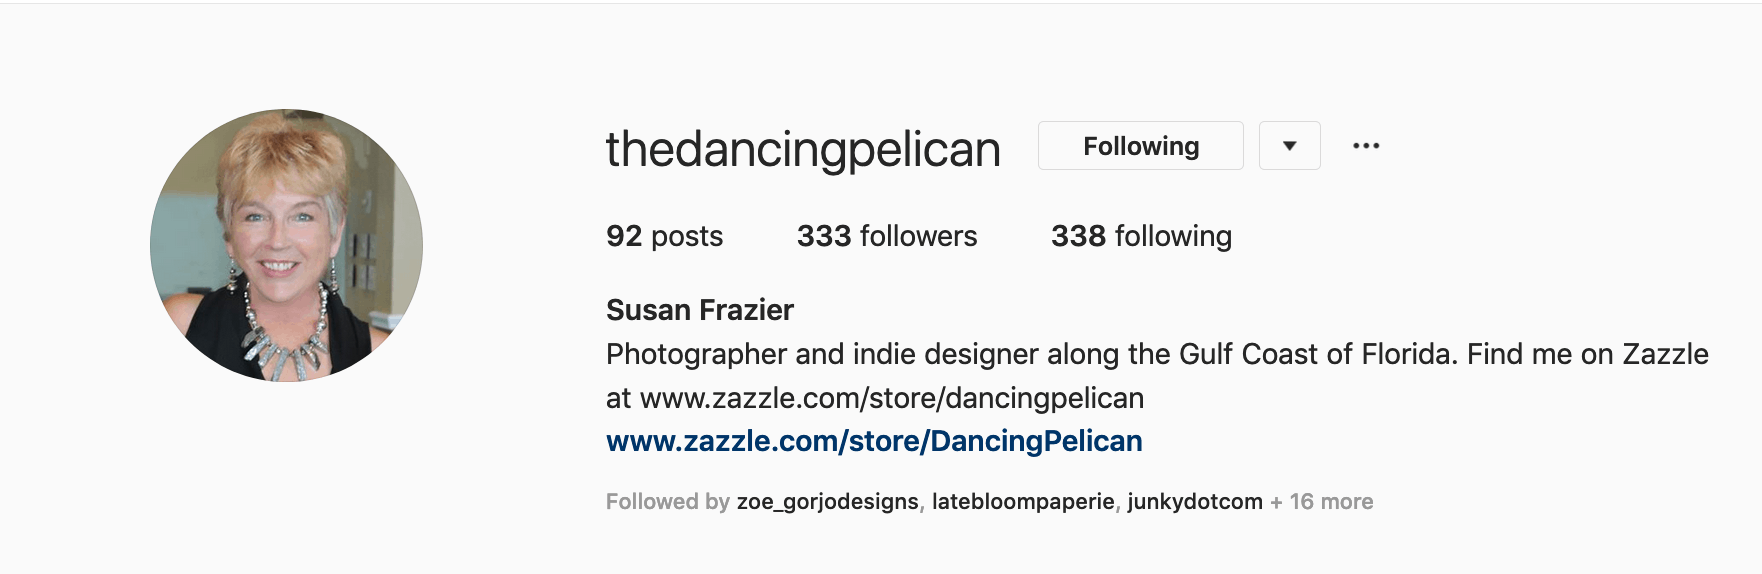 @TheDancingPelican by Susan Frazier, designer on Zazzle and 5 Step Profit Plan™ Member. She has created a professional looking profile complete with store links and contact information. 